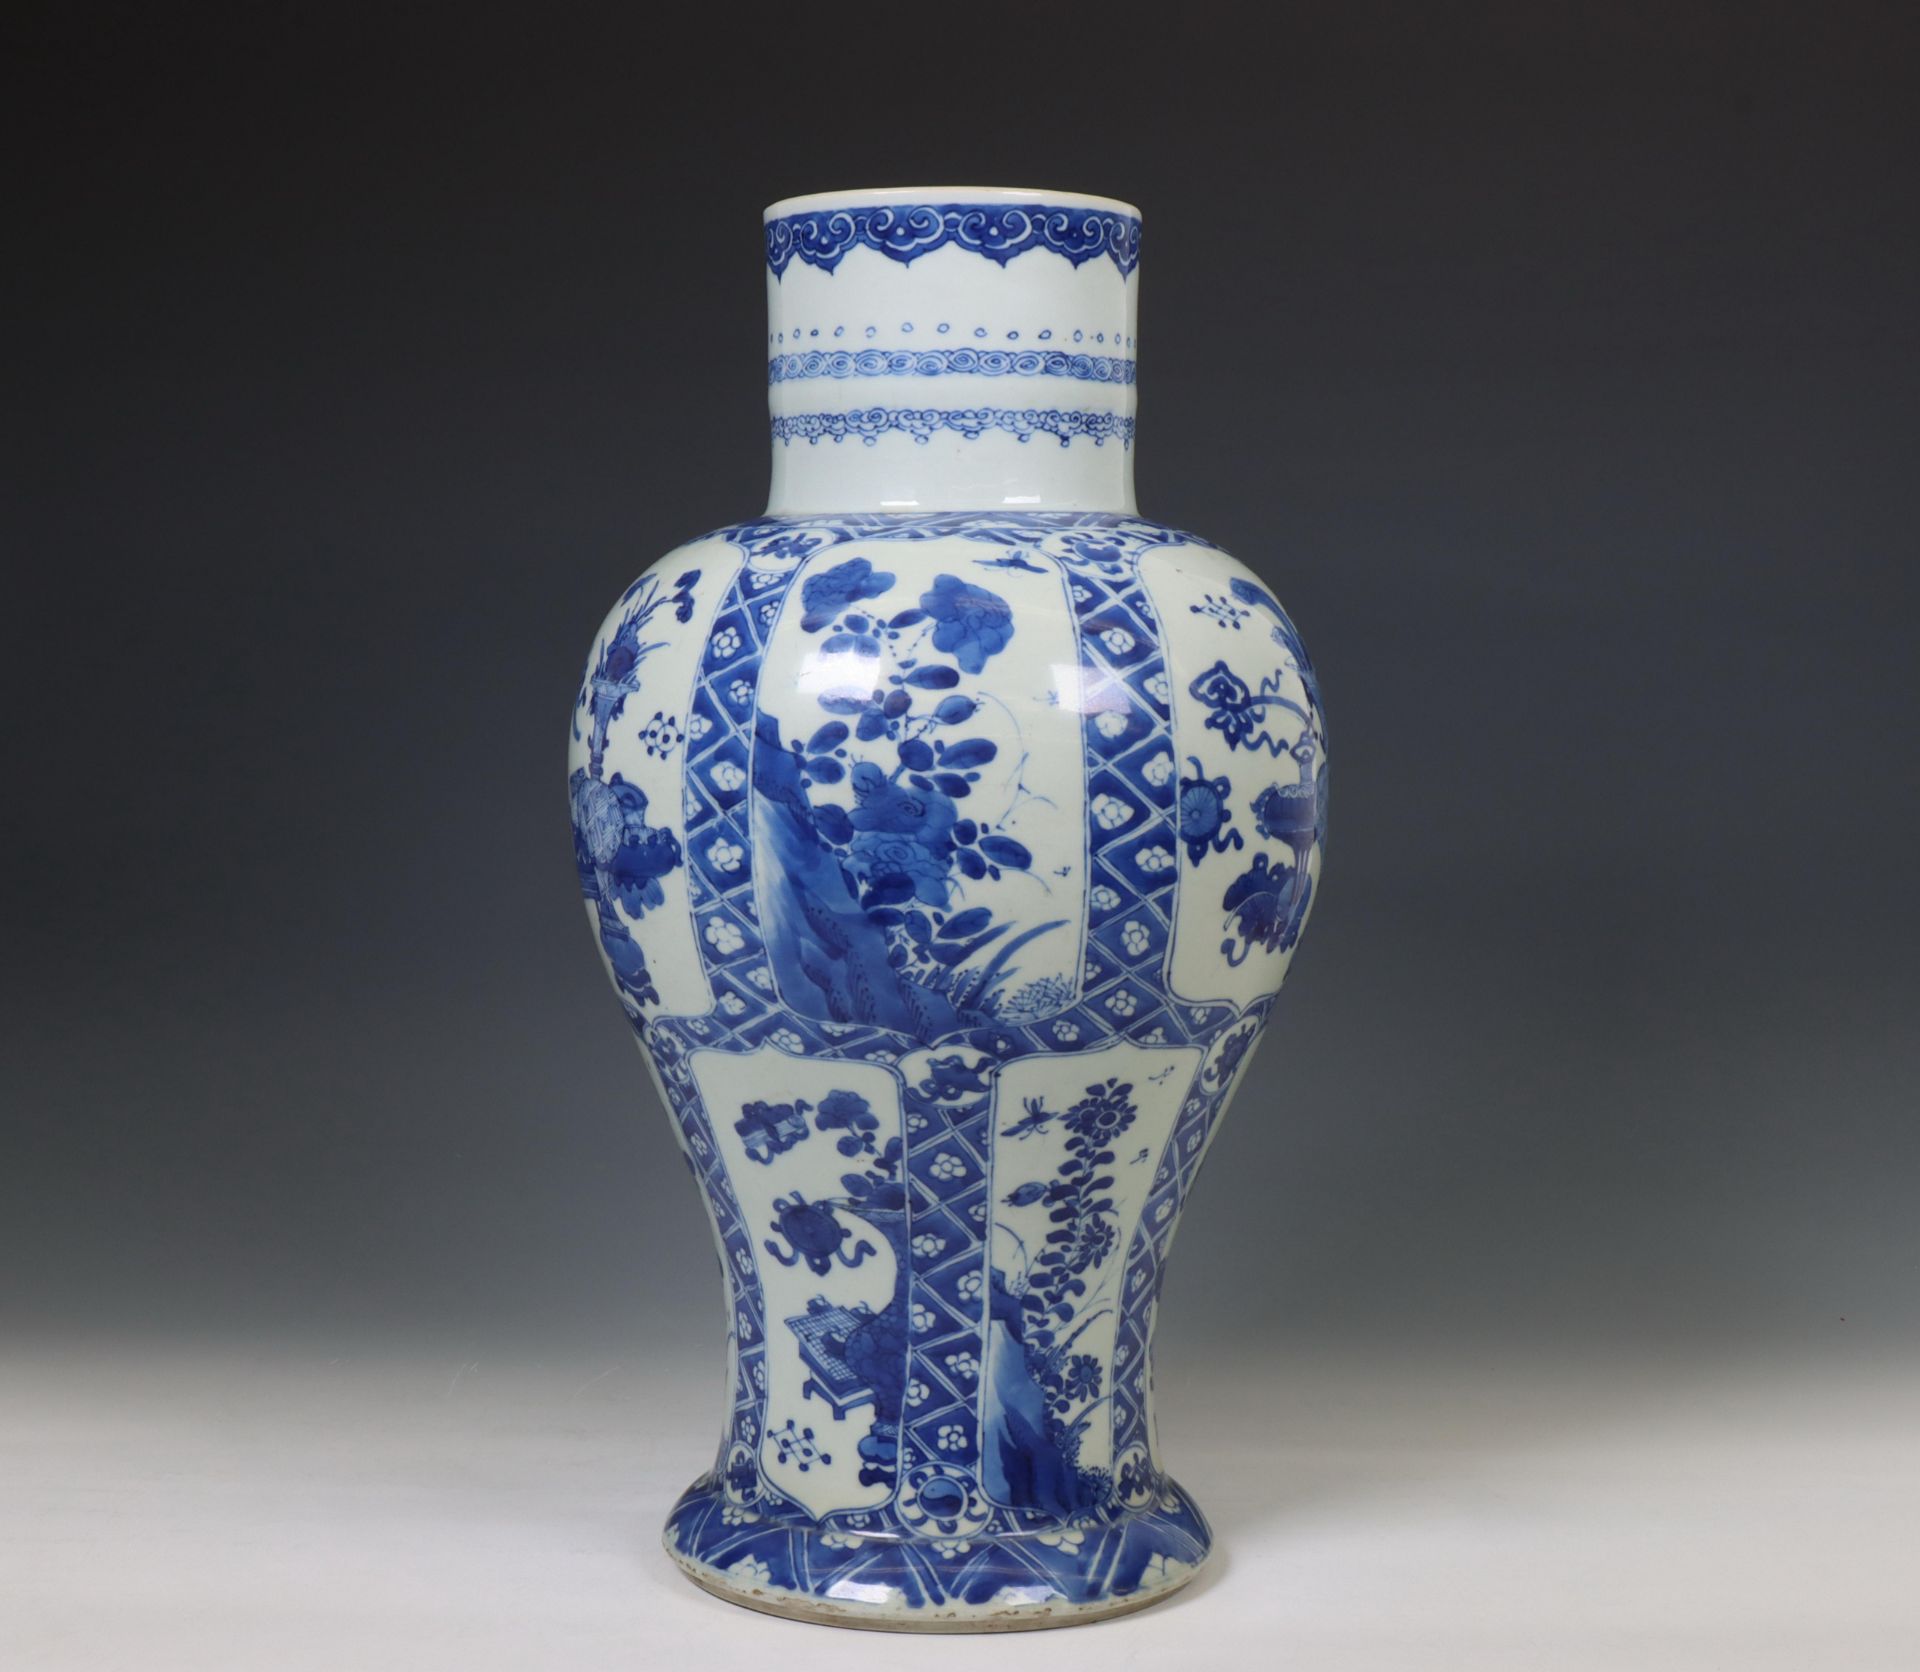 China, a blue and white porcelain baluster vase, 18th century,